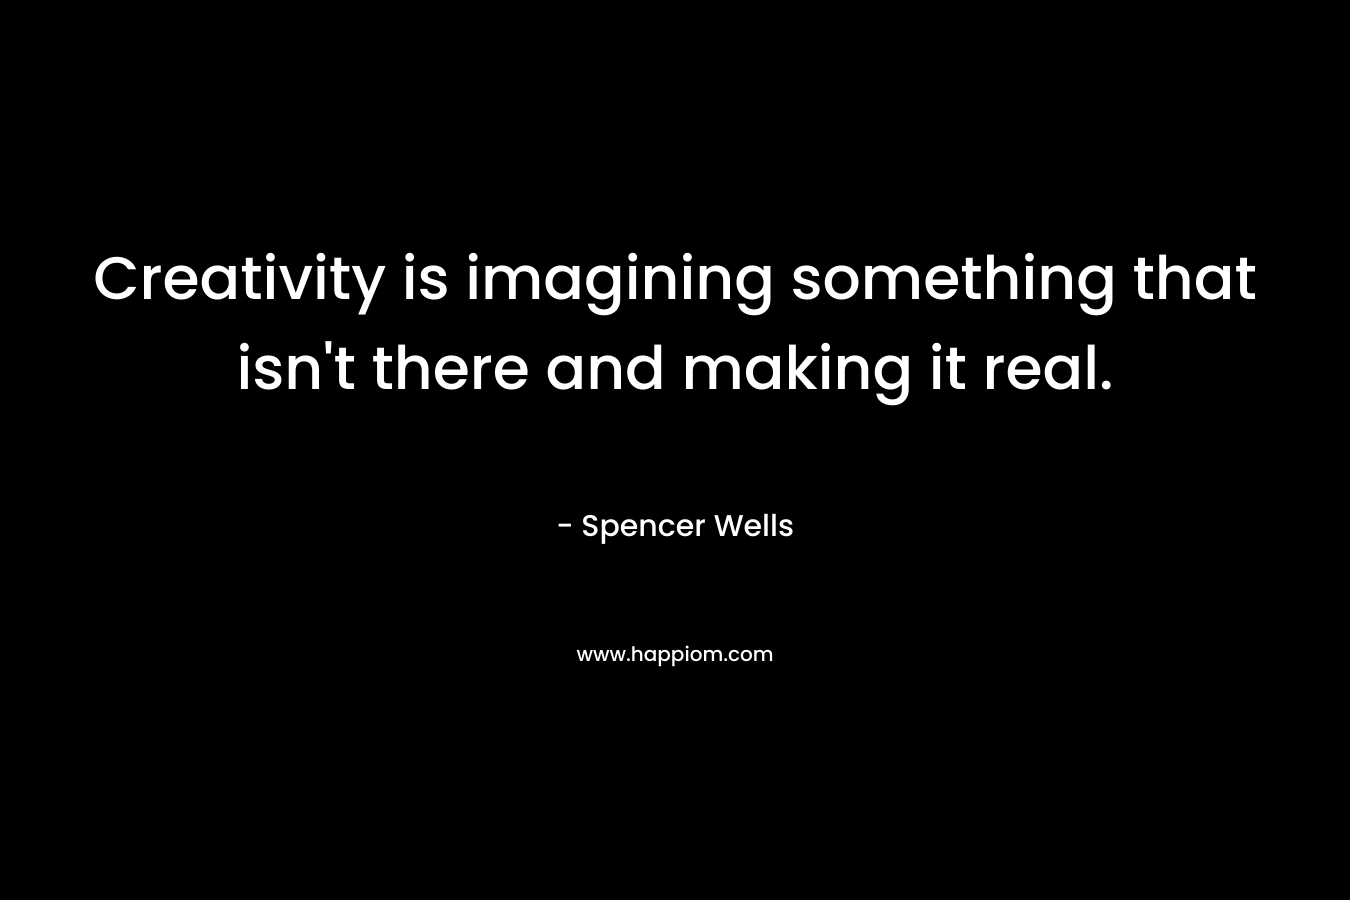 Creativity is imagining something that isn’t there and making it real. – Spencer Wells